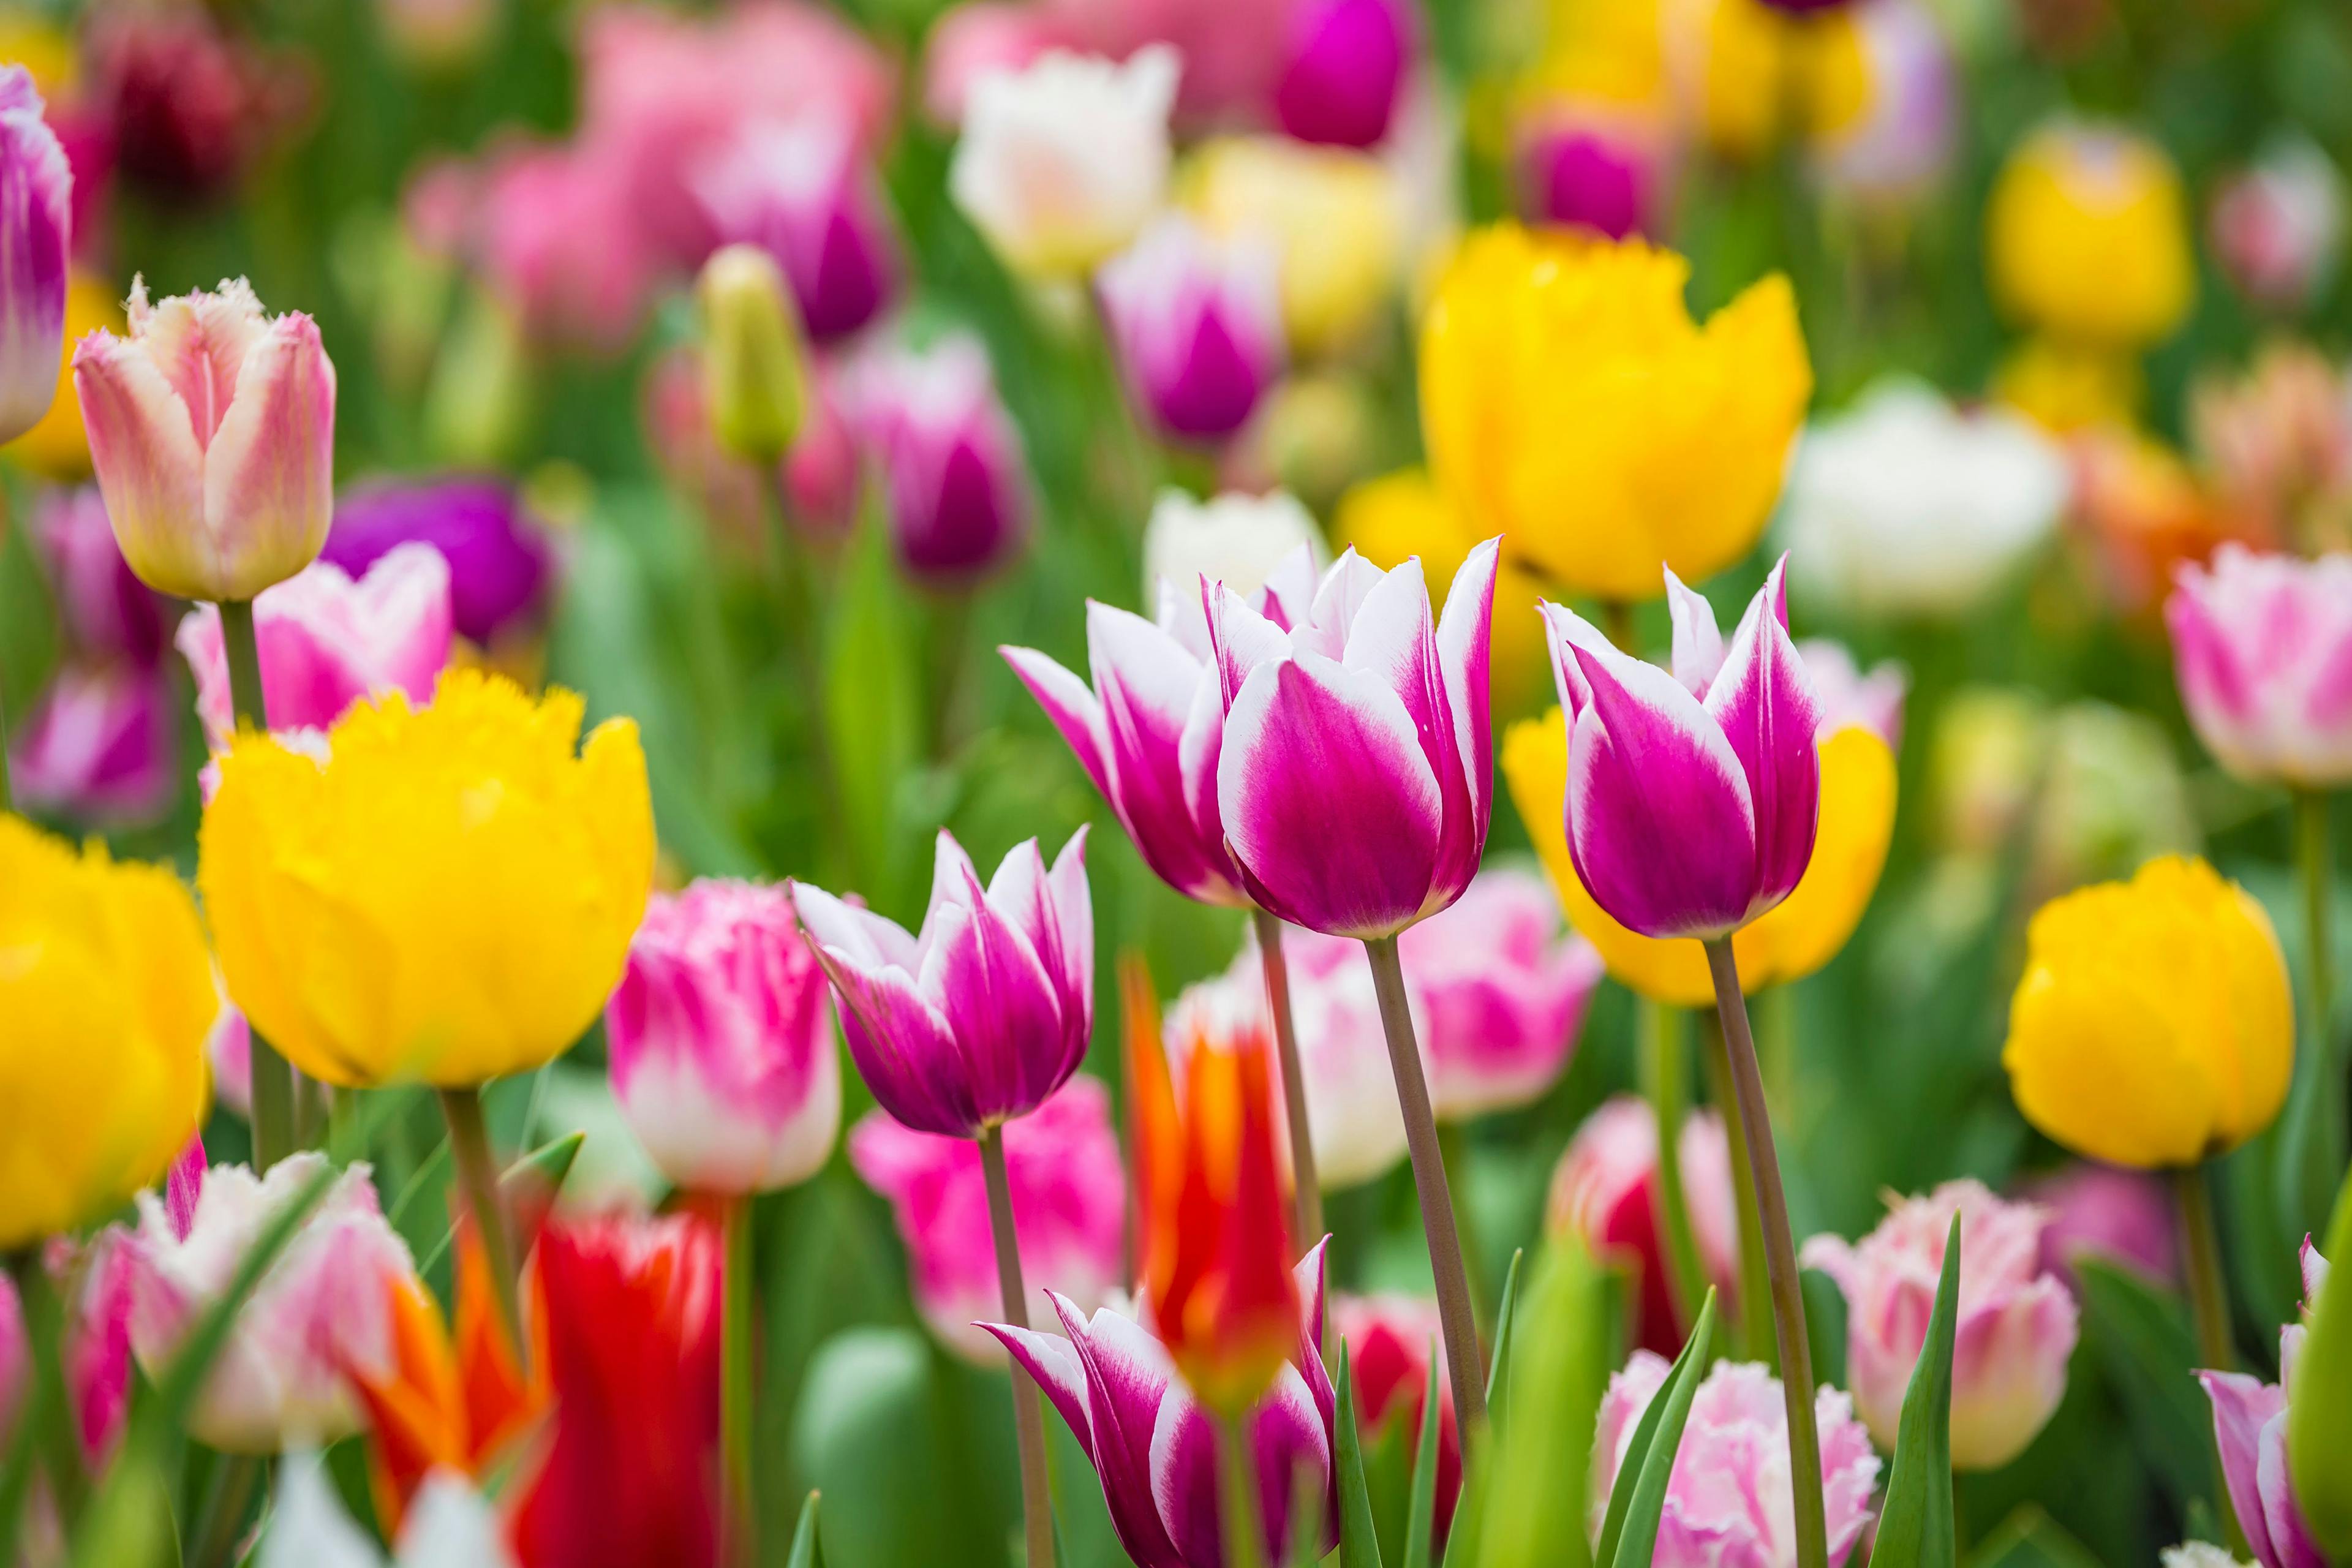 Tulips are just one example of toxic flowers for pets. (sunday_morning / stock.adobe.com)